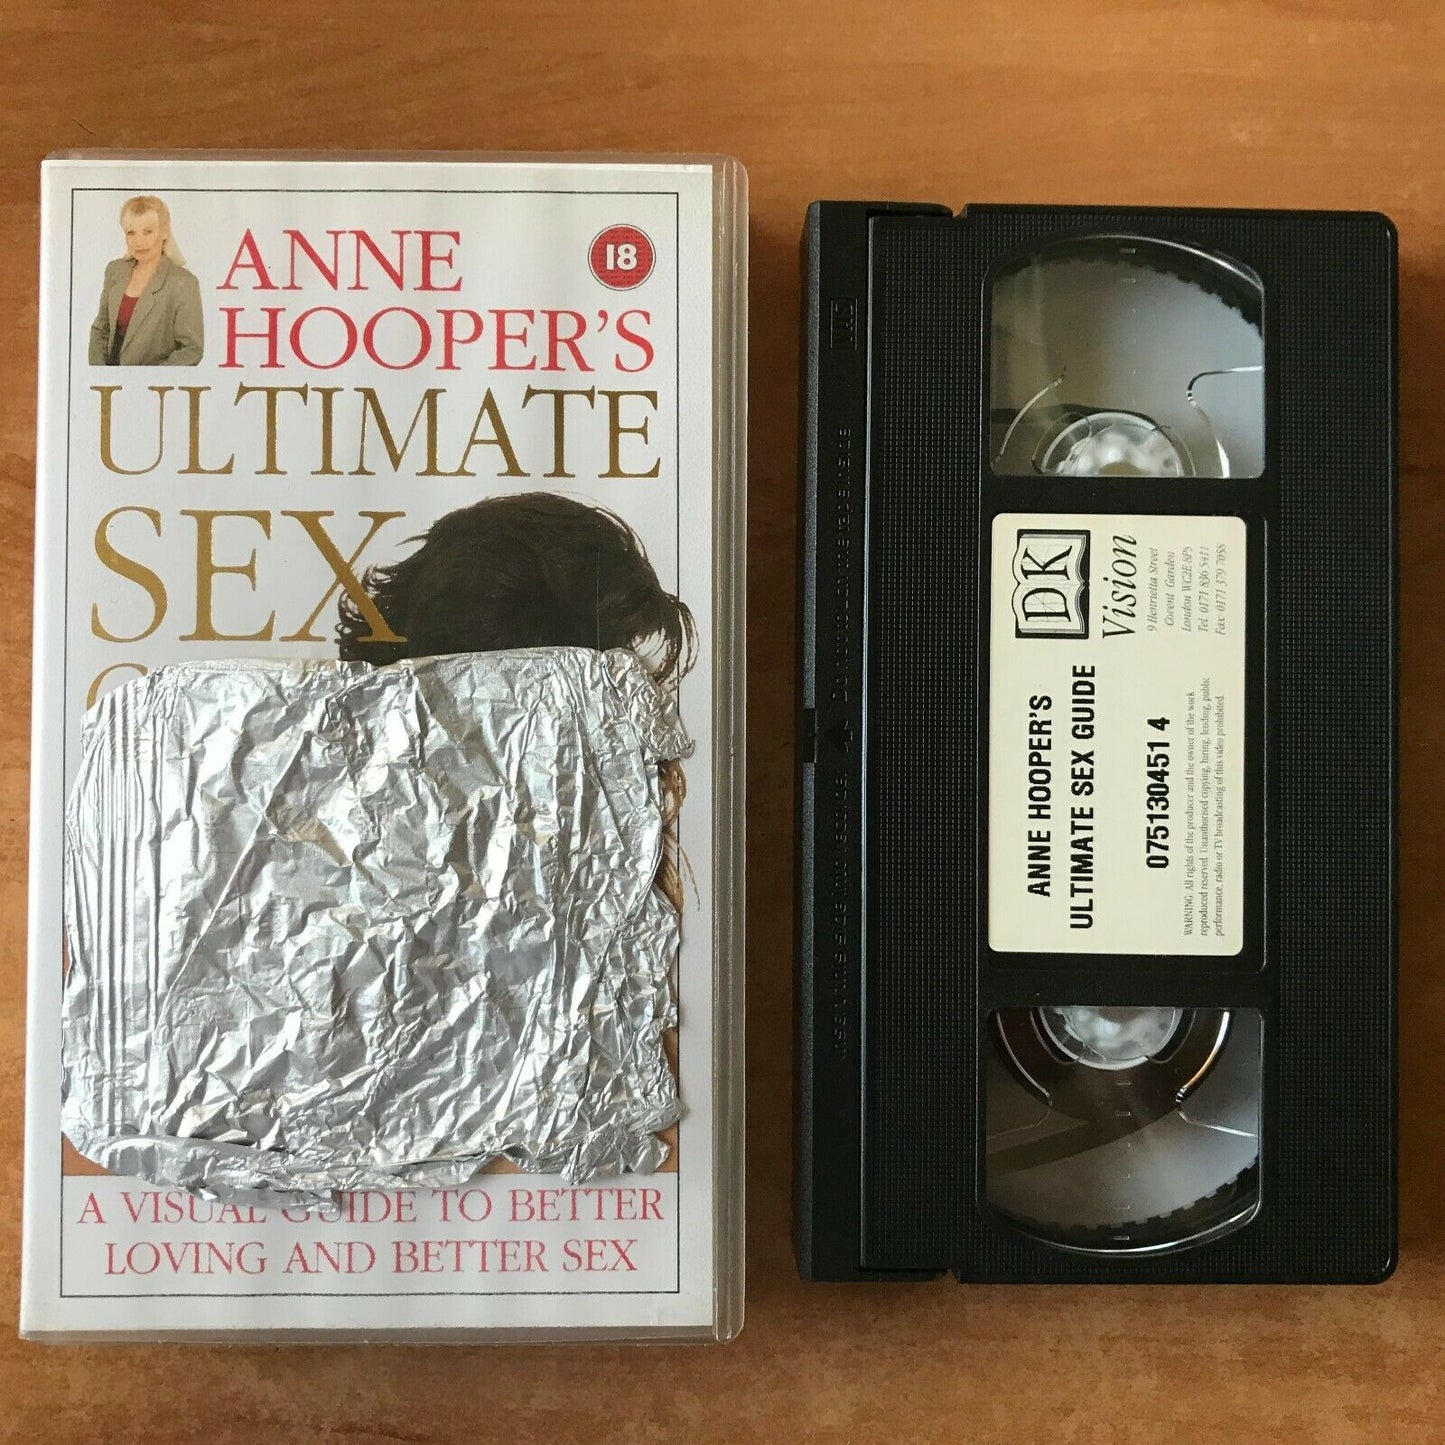 Ultimate Sex Guide; [Anne Hooper]: Basic - Positions - Massage Techniques - VHS-